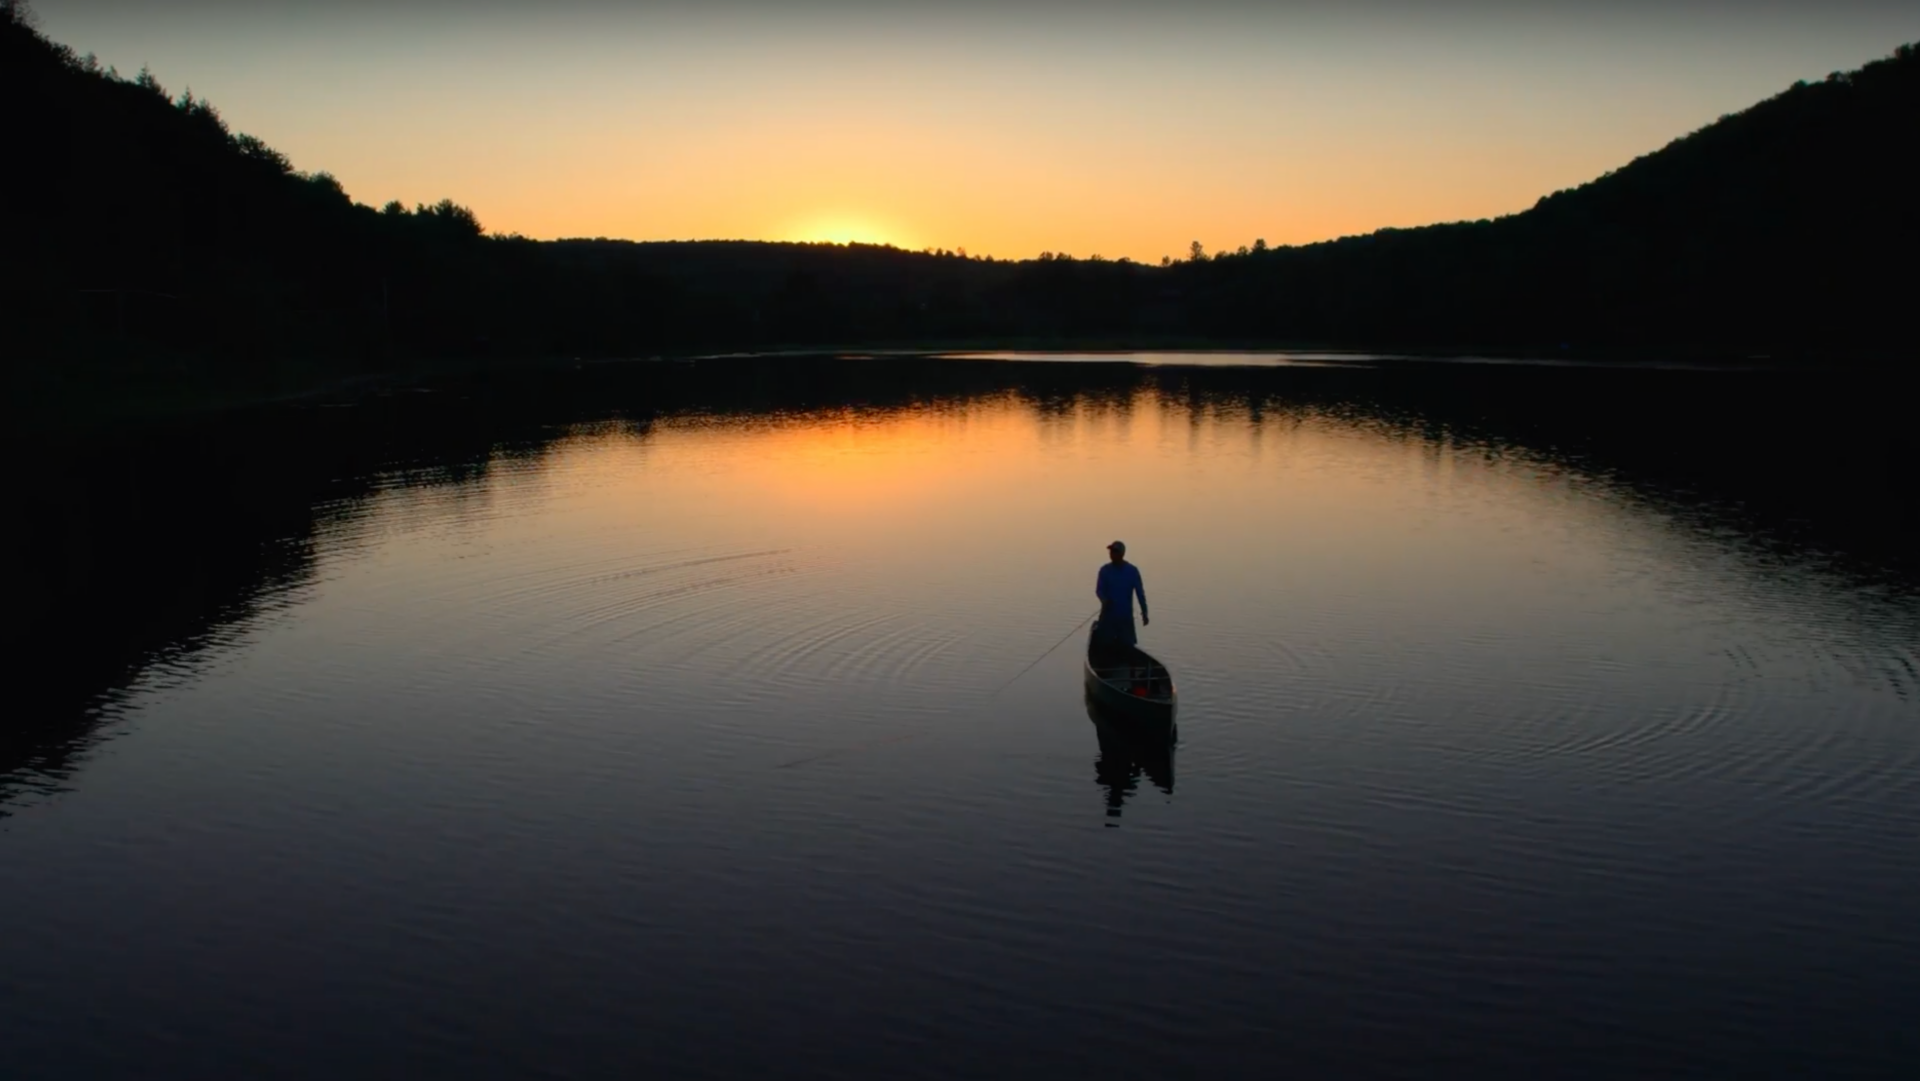 An aerial view of a man fishing in a lake at sunset